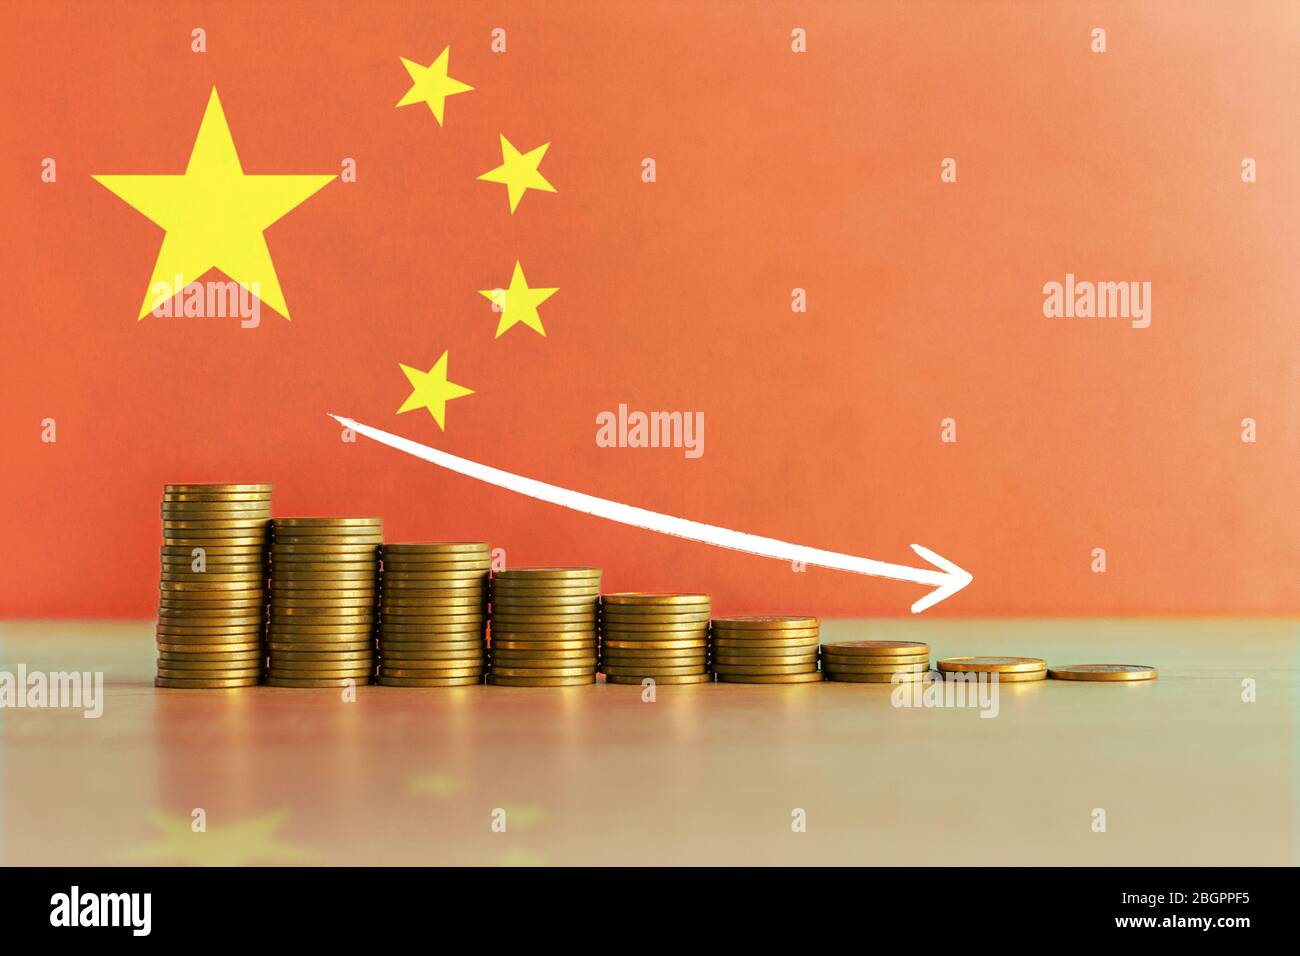 Stock photo of economic crisis and recession concept in China with descending ladder of coins and flag in background Stock Photo